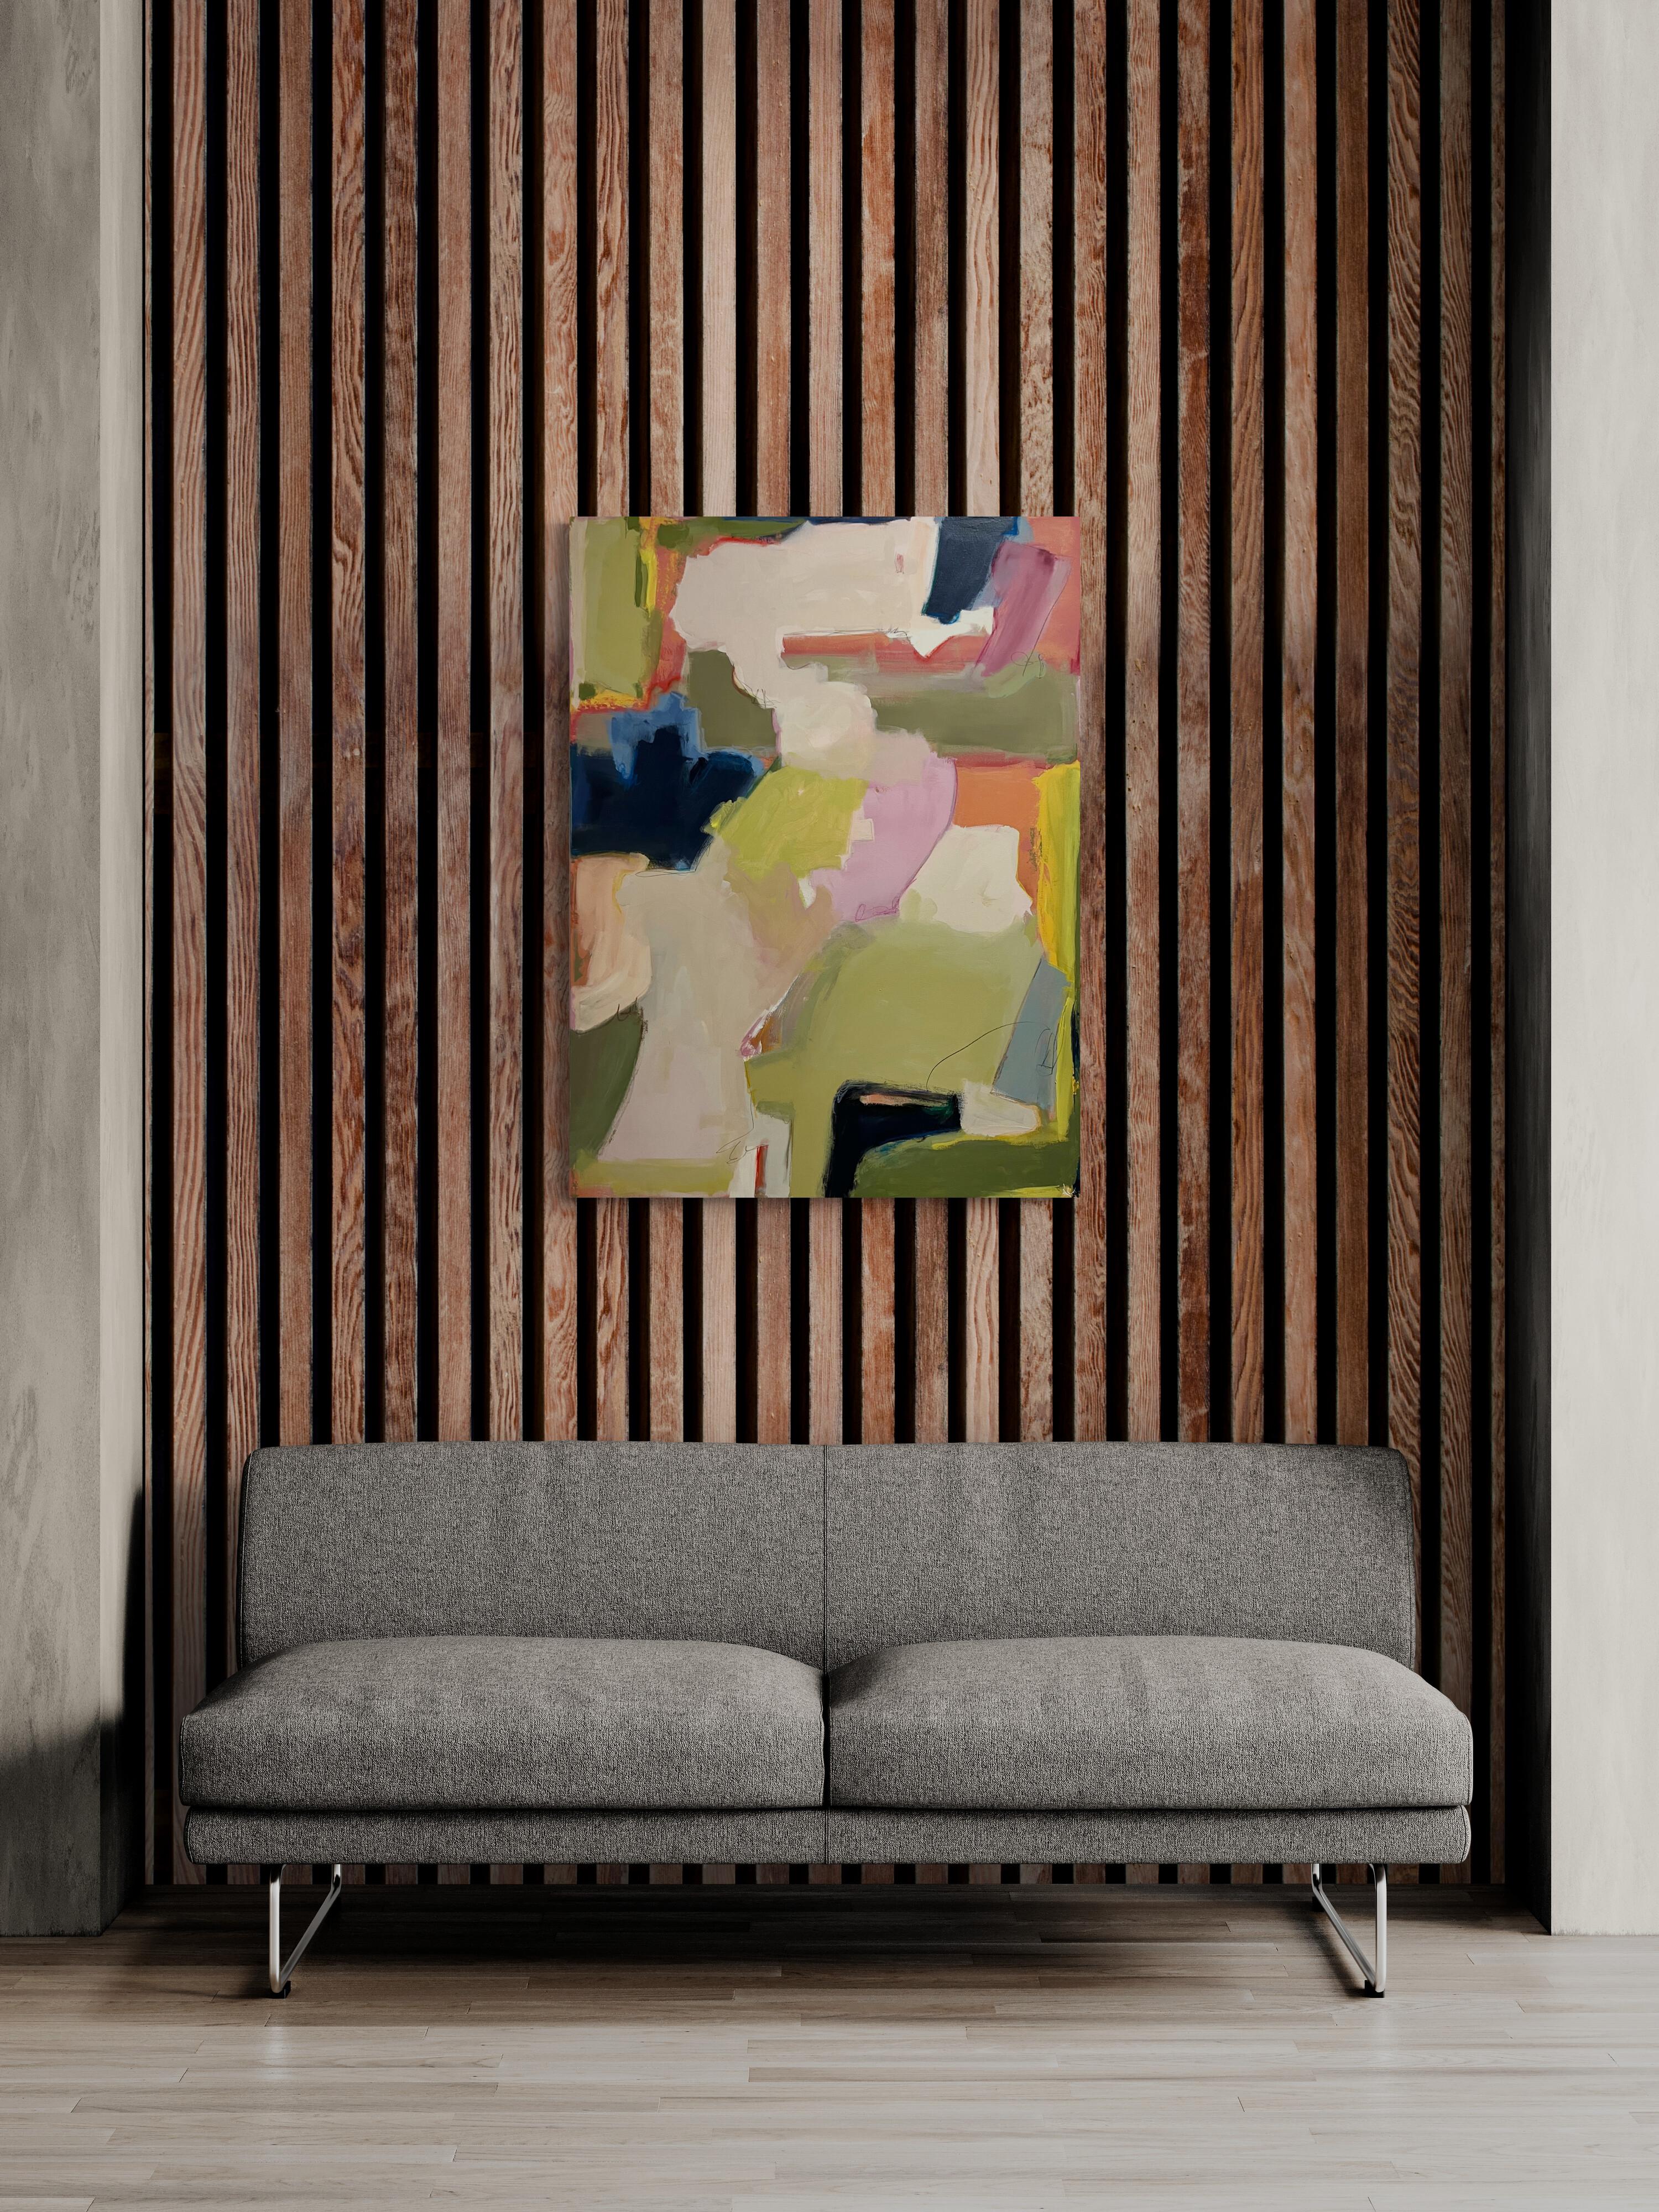 Kelley Carman
Daily News (Abstract, Gestural, Navy, Pink, Green)
Acrylic and Oil Stick
Year: 2023
Size: 40x30x1.5in
Signed
COA provided 
Ref.: 924802-2044

Tags: Abstract, Gestural, Navy, Pink, Green   

-----

Kelley Carman currently splits her